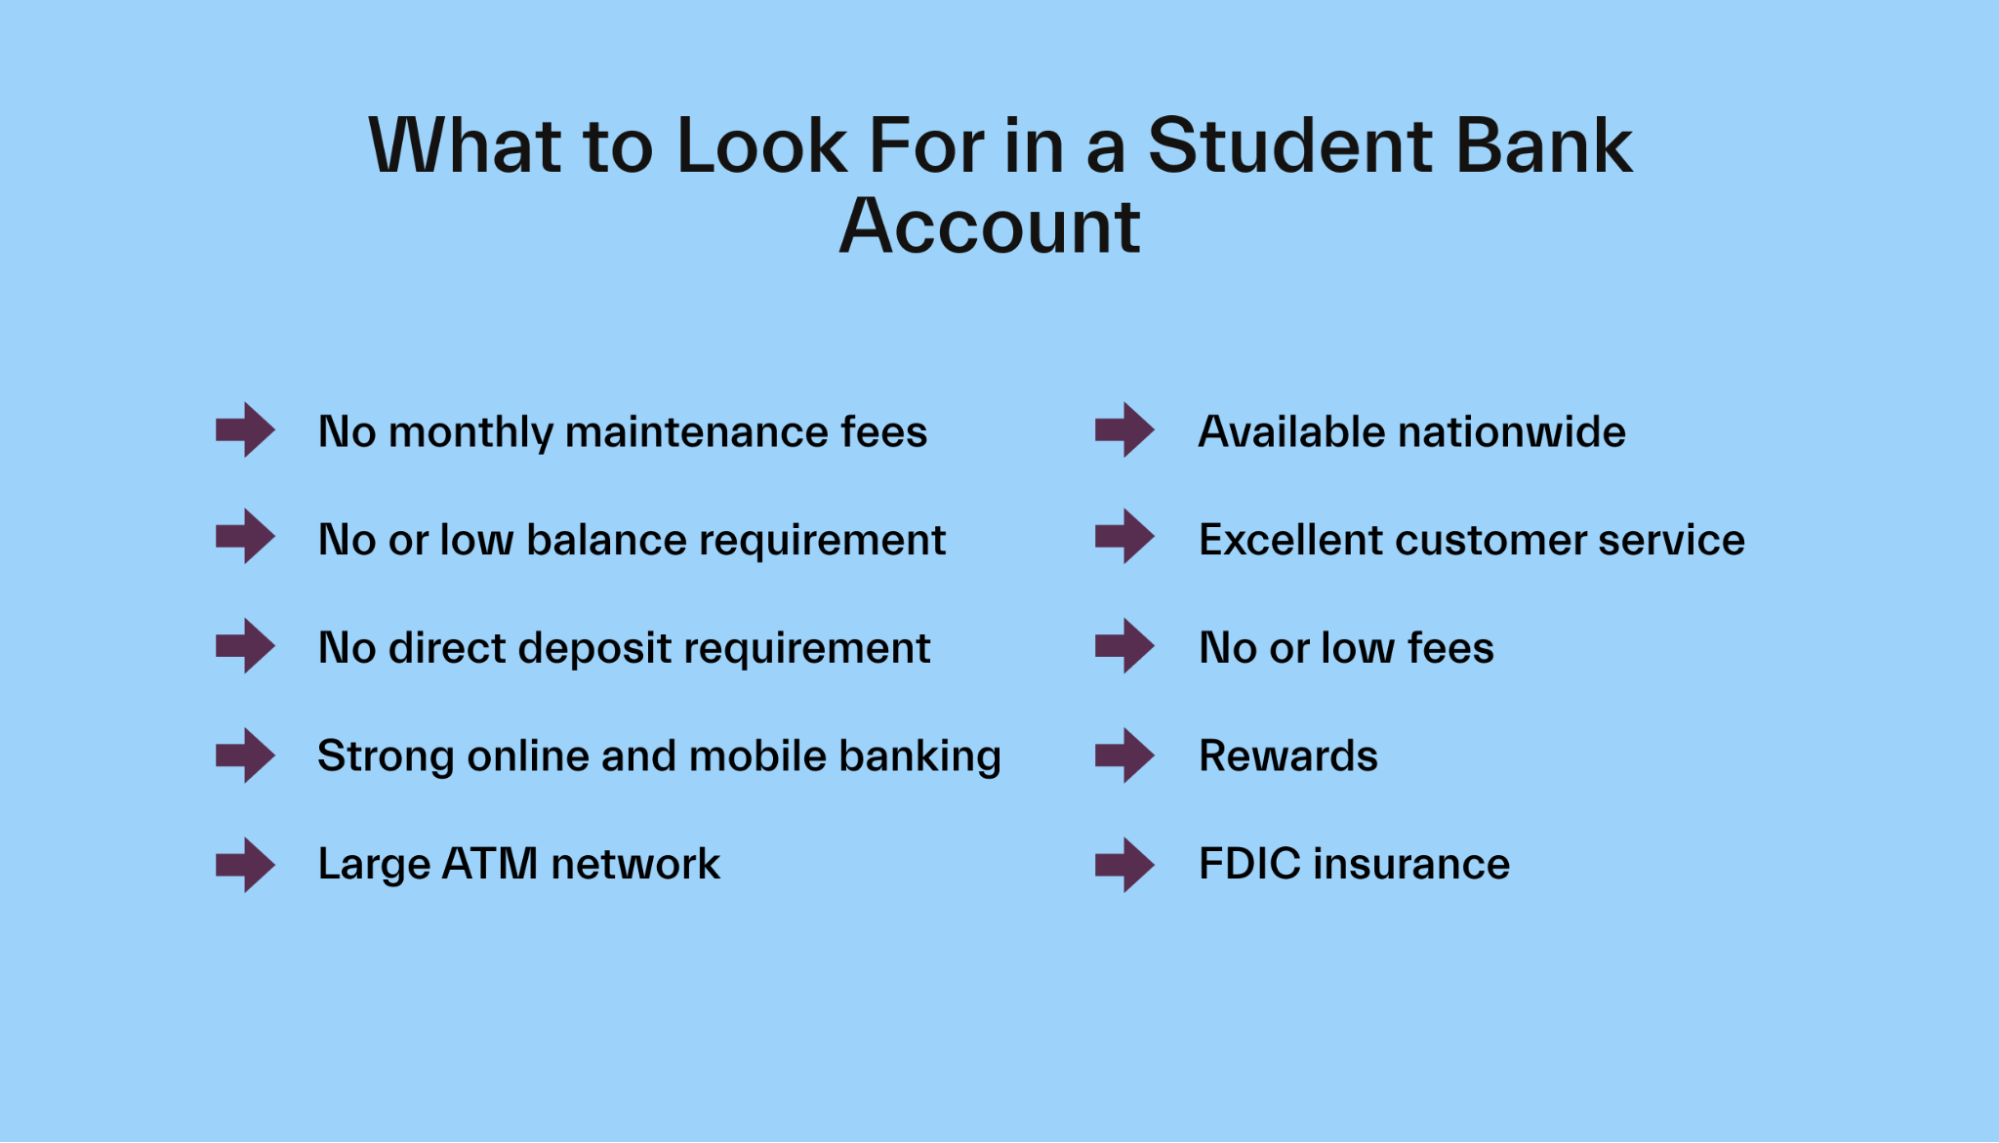 What to Look For in a Student Bank Account